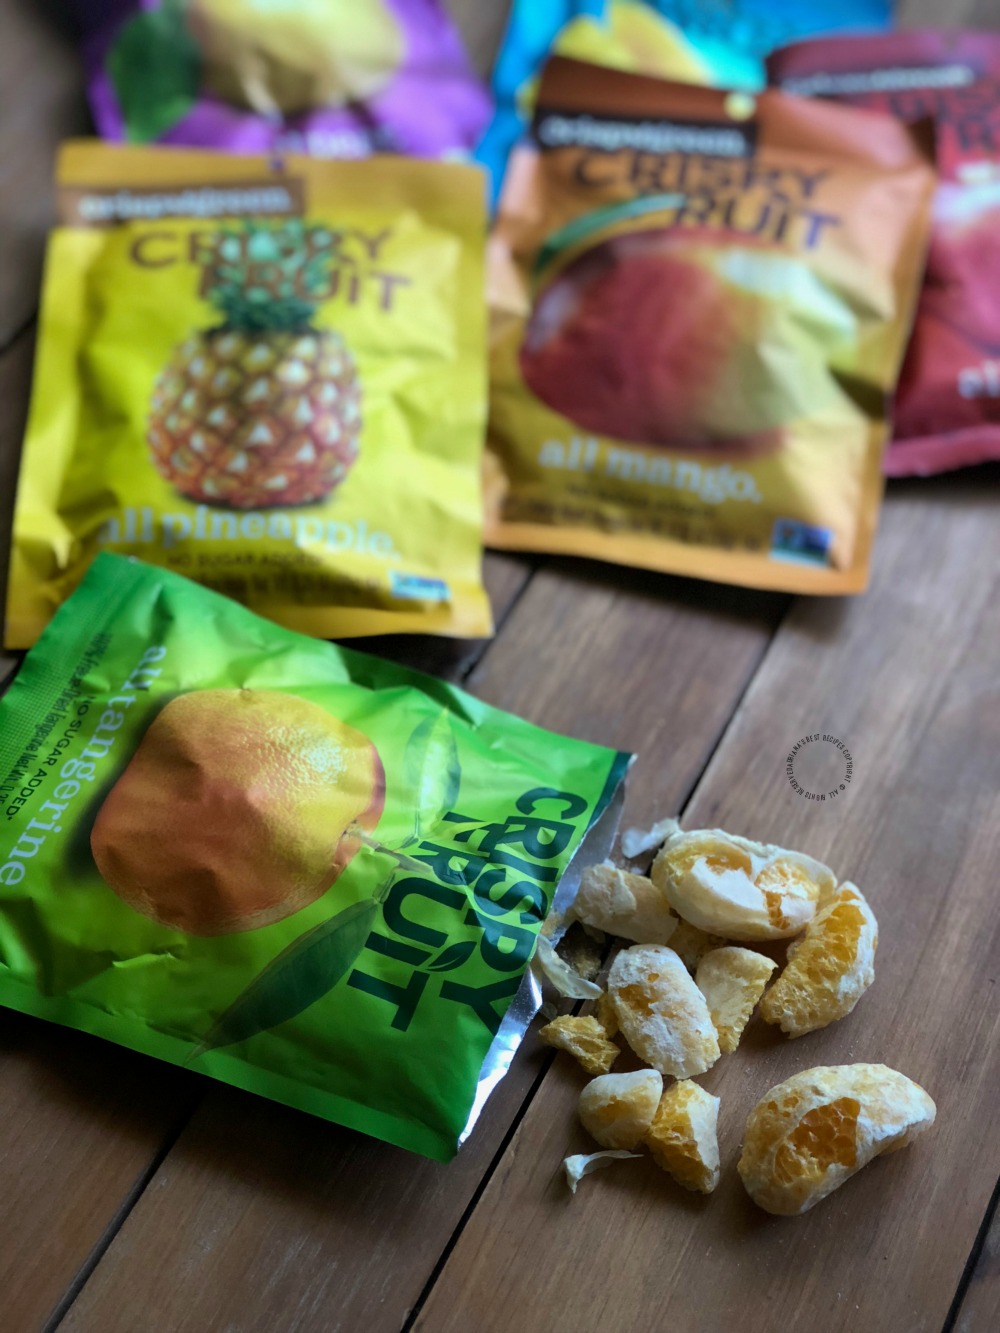 Crispy Fruit snacks made with real fruit and freeze dried